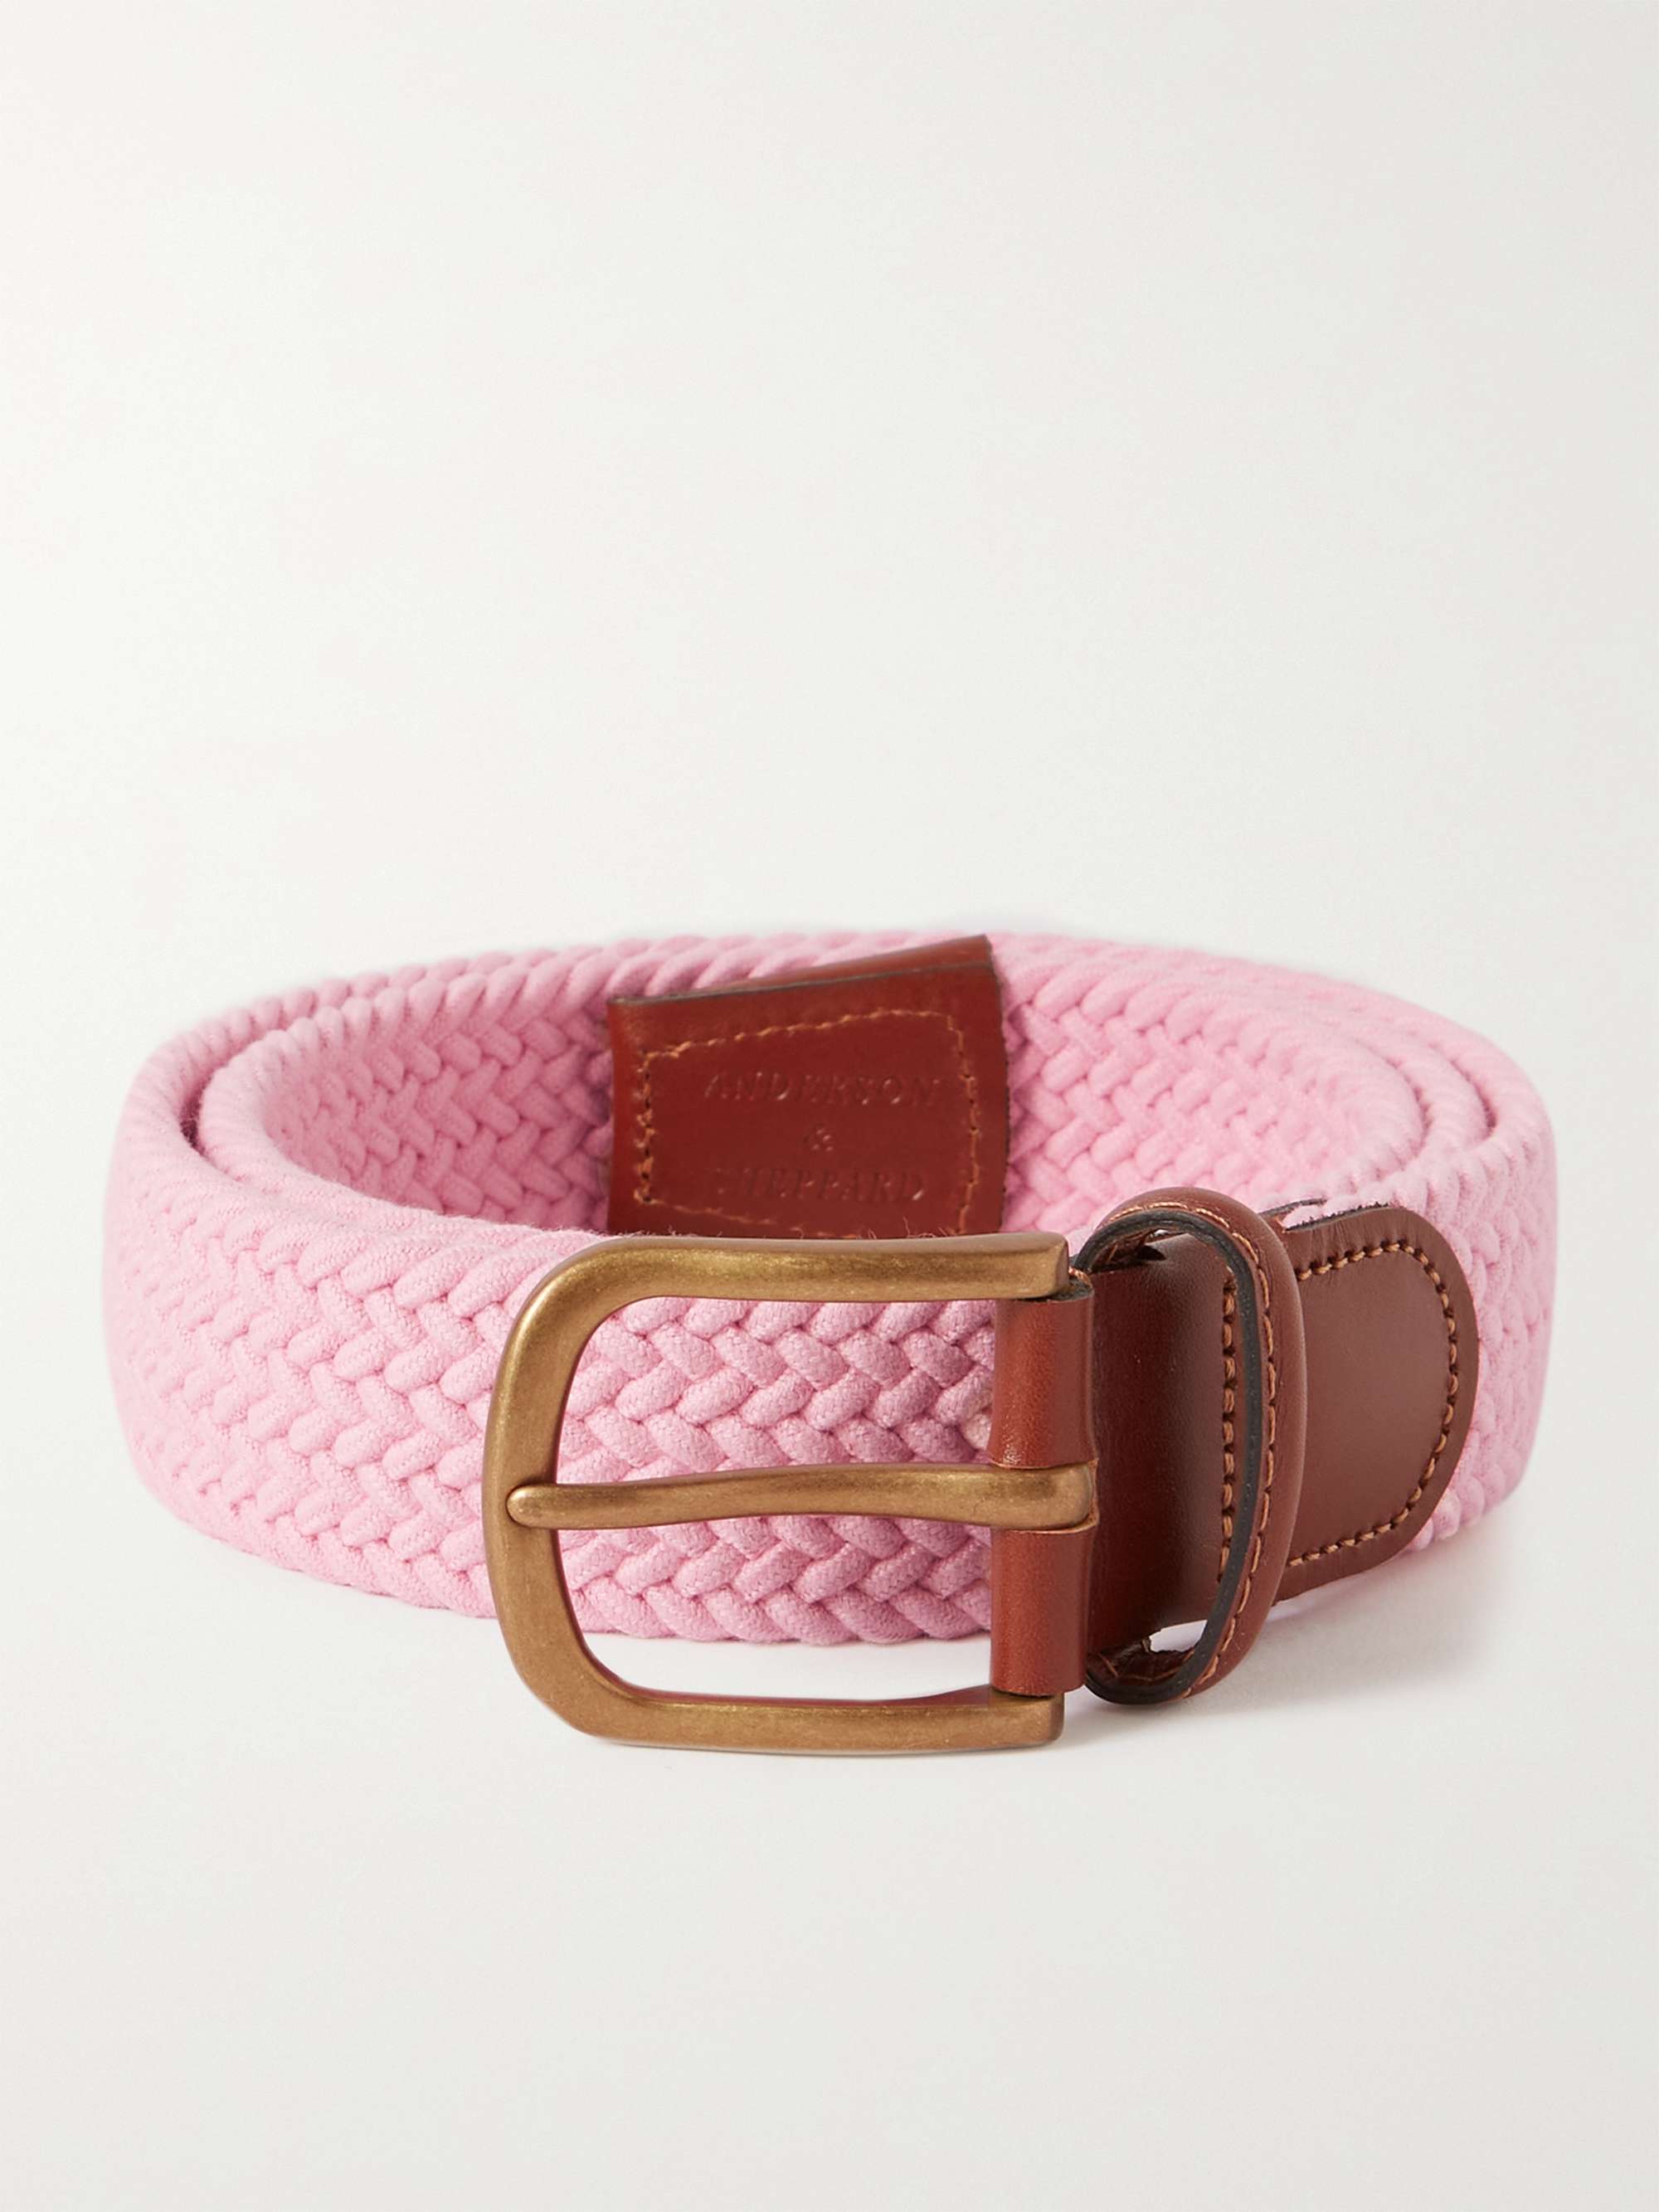 ANDERSON & SHEPPARD 3.5cm Leather-Trimmed Woven Cotton Belt